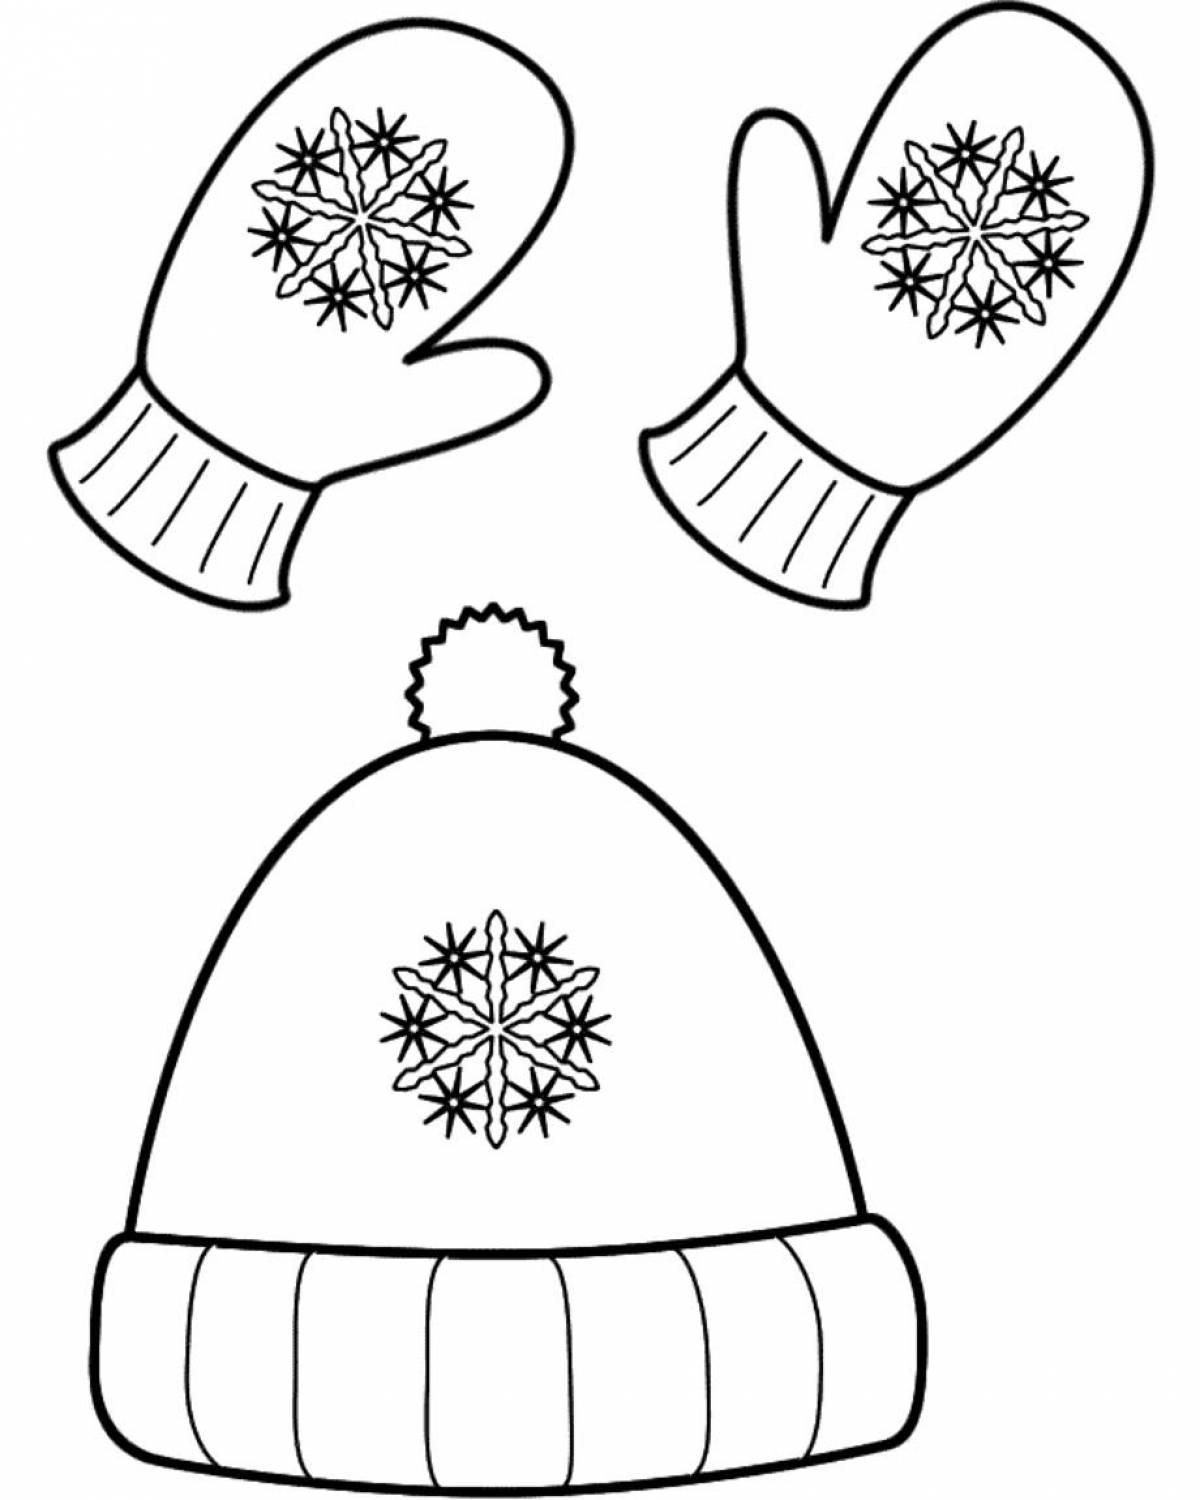 Adorable mittens coloring book for kids